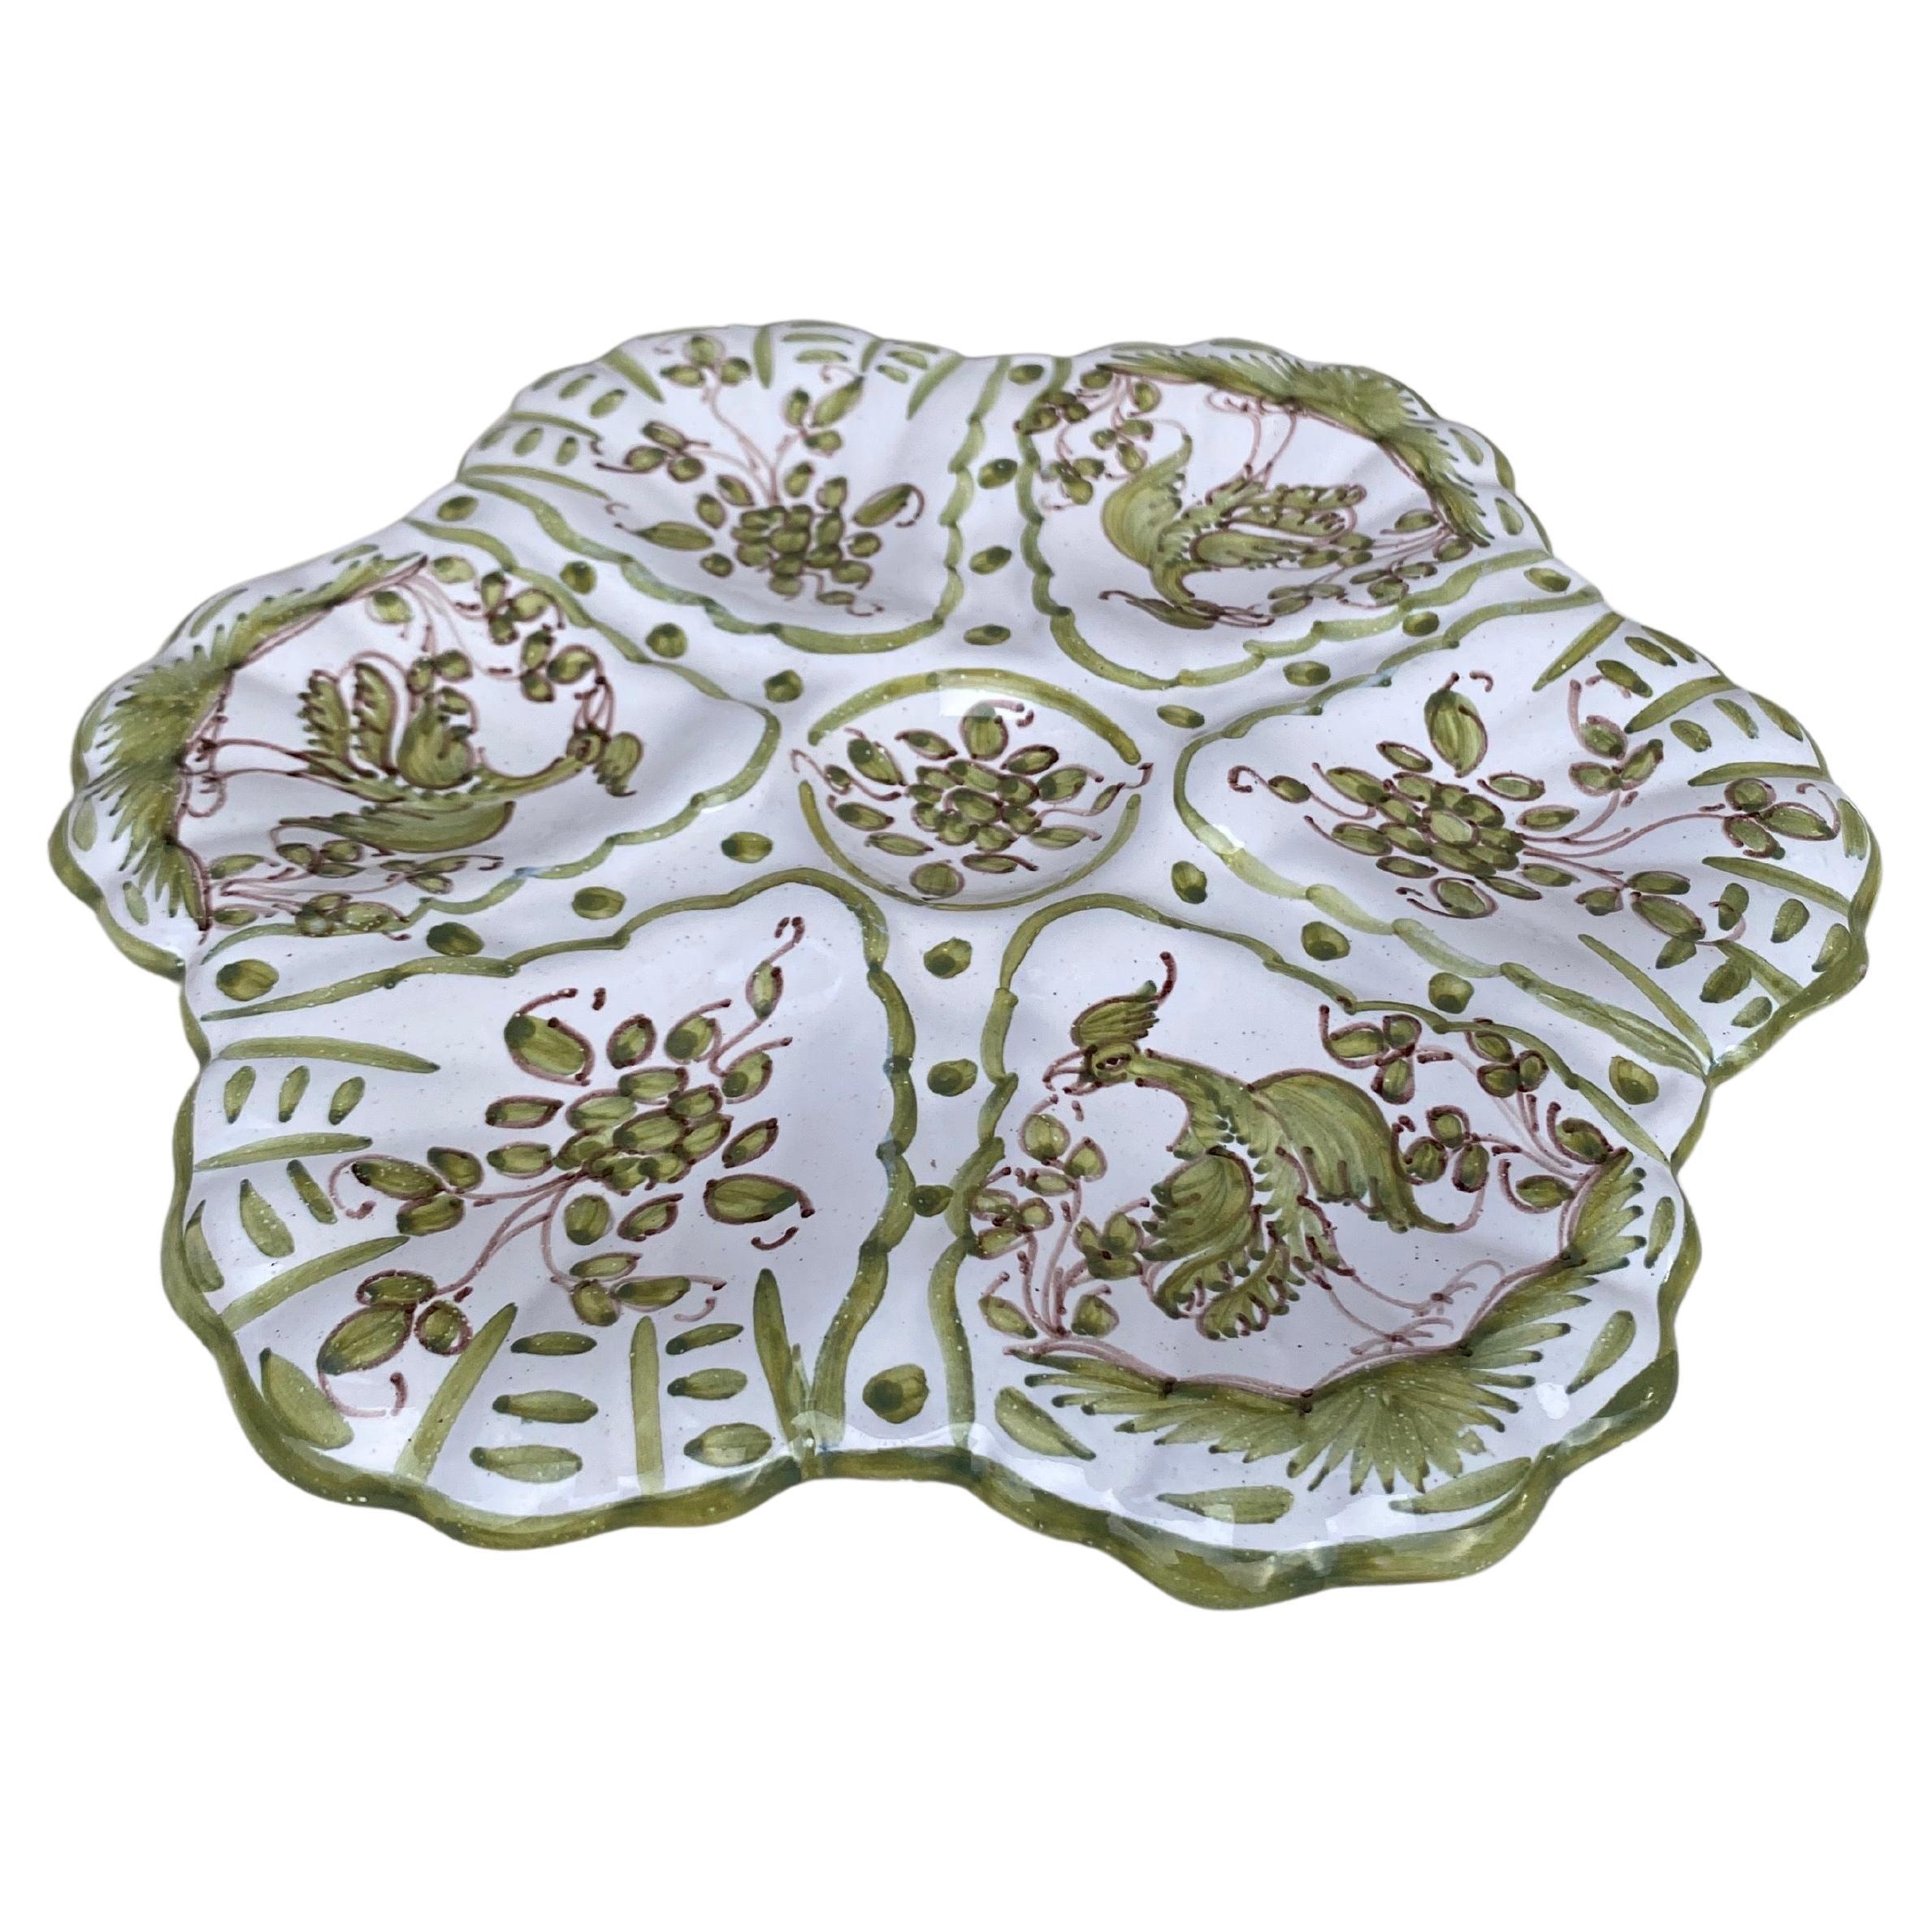 French Faience rustic oyster plate Moustiers style, circa 1940.